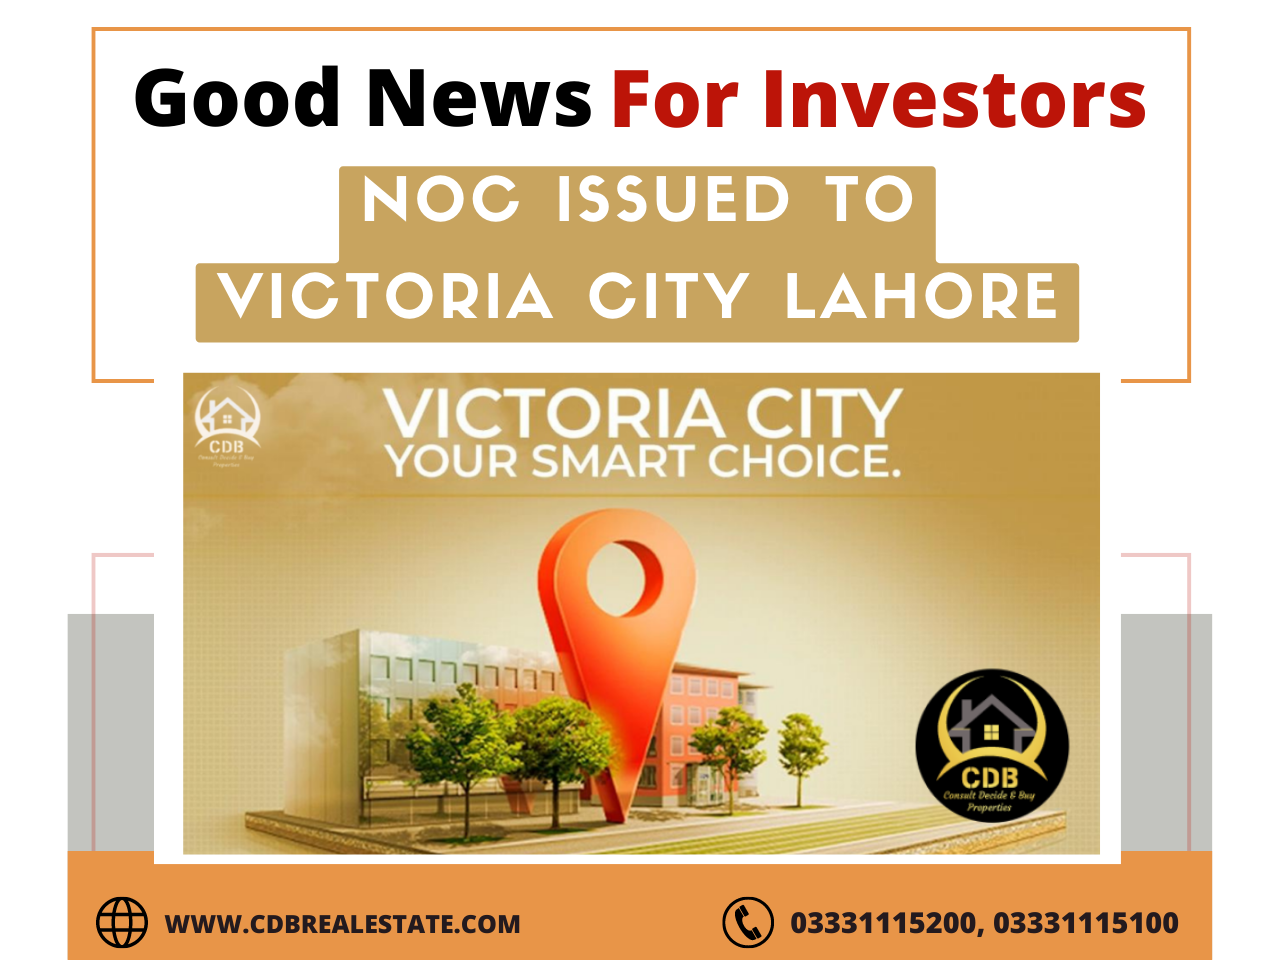 Good News For Investors! NOC issued to Victoria City Lahore